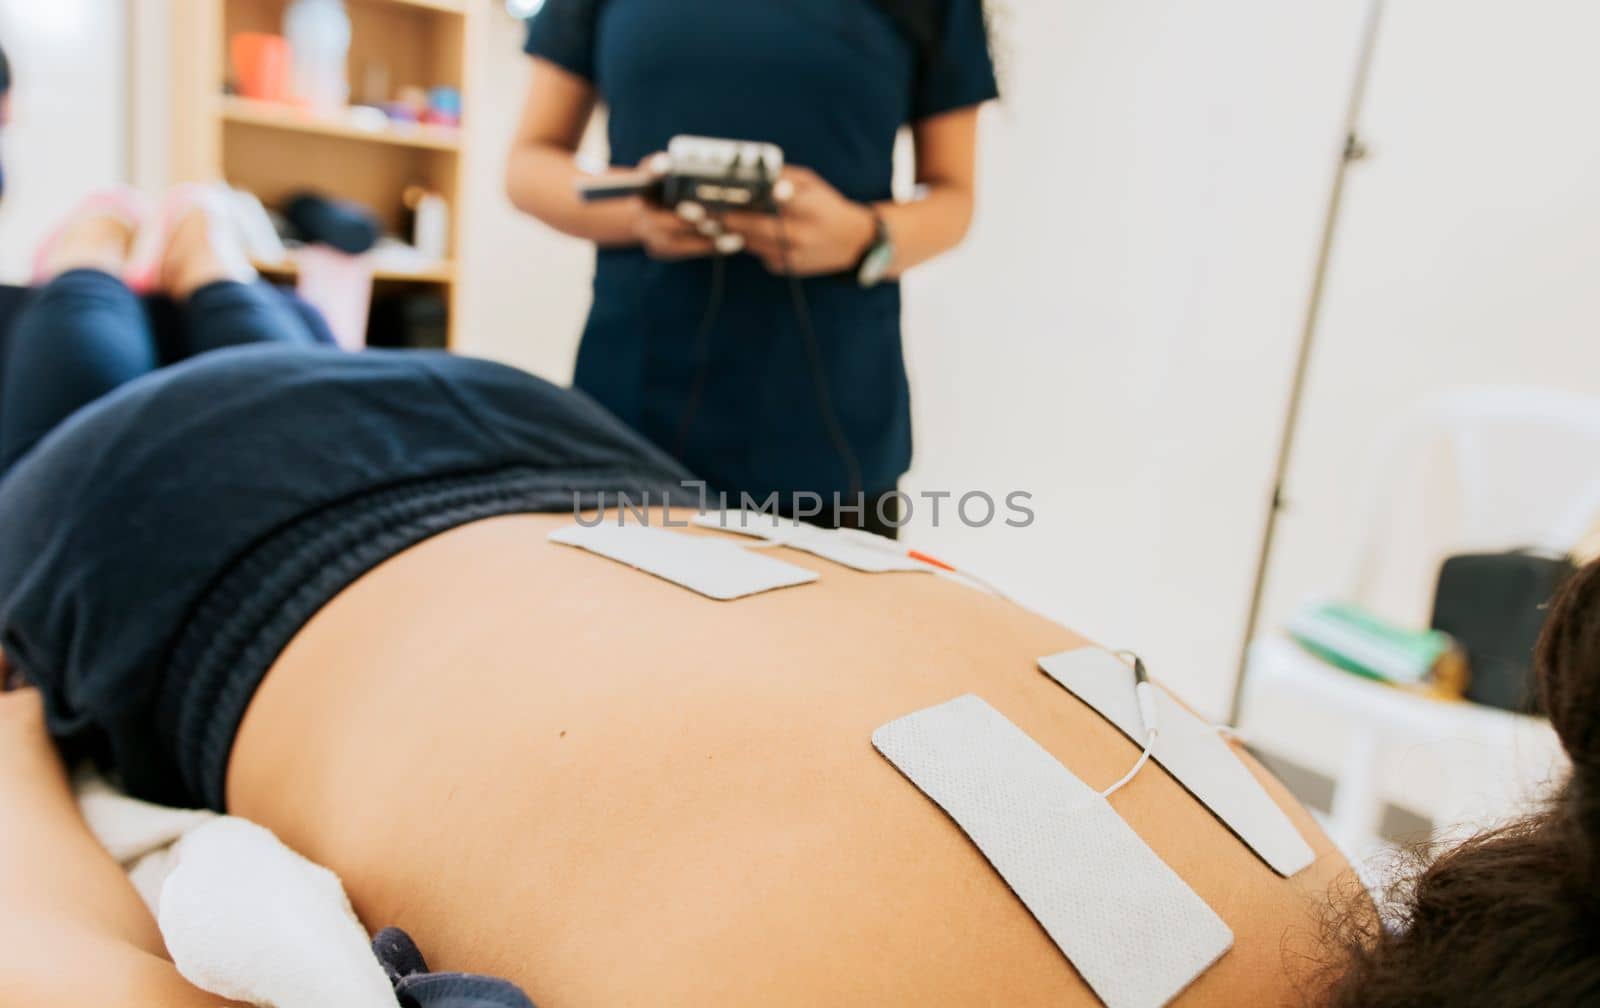 Physiotherapist electrostimulating a patient, Electrode treatment to patient lying down, Professional physiotherapist electrostimulating a lying patient. Lower back therapy with electrode pads by isaiphoto